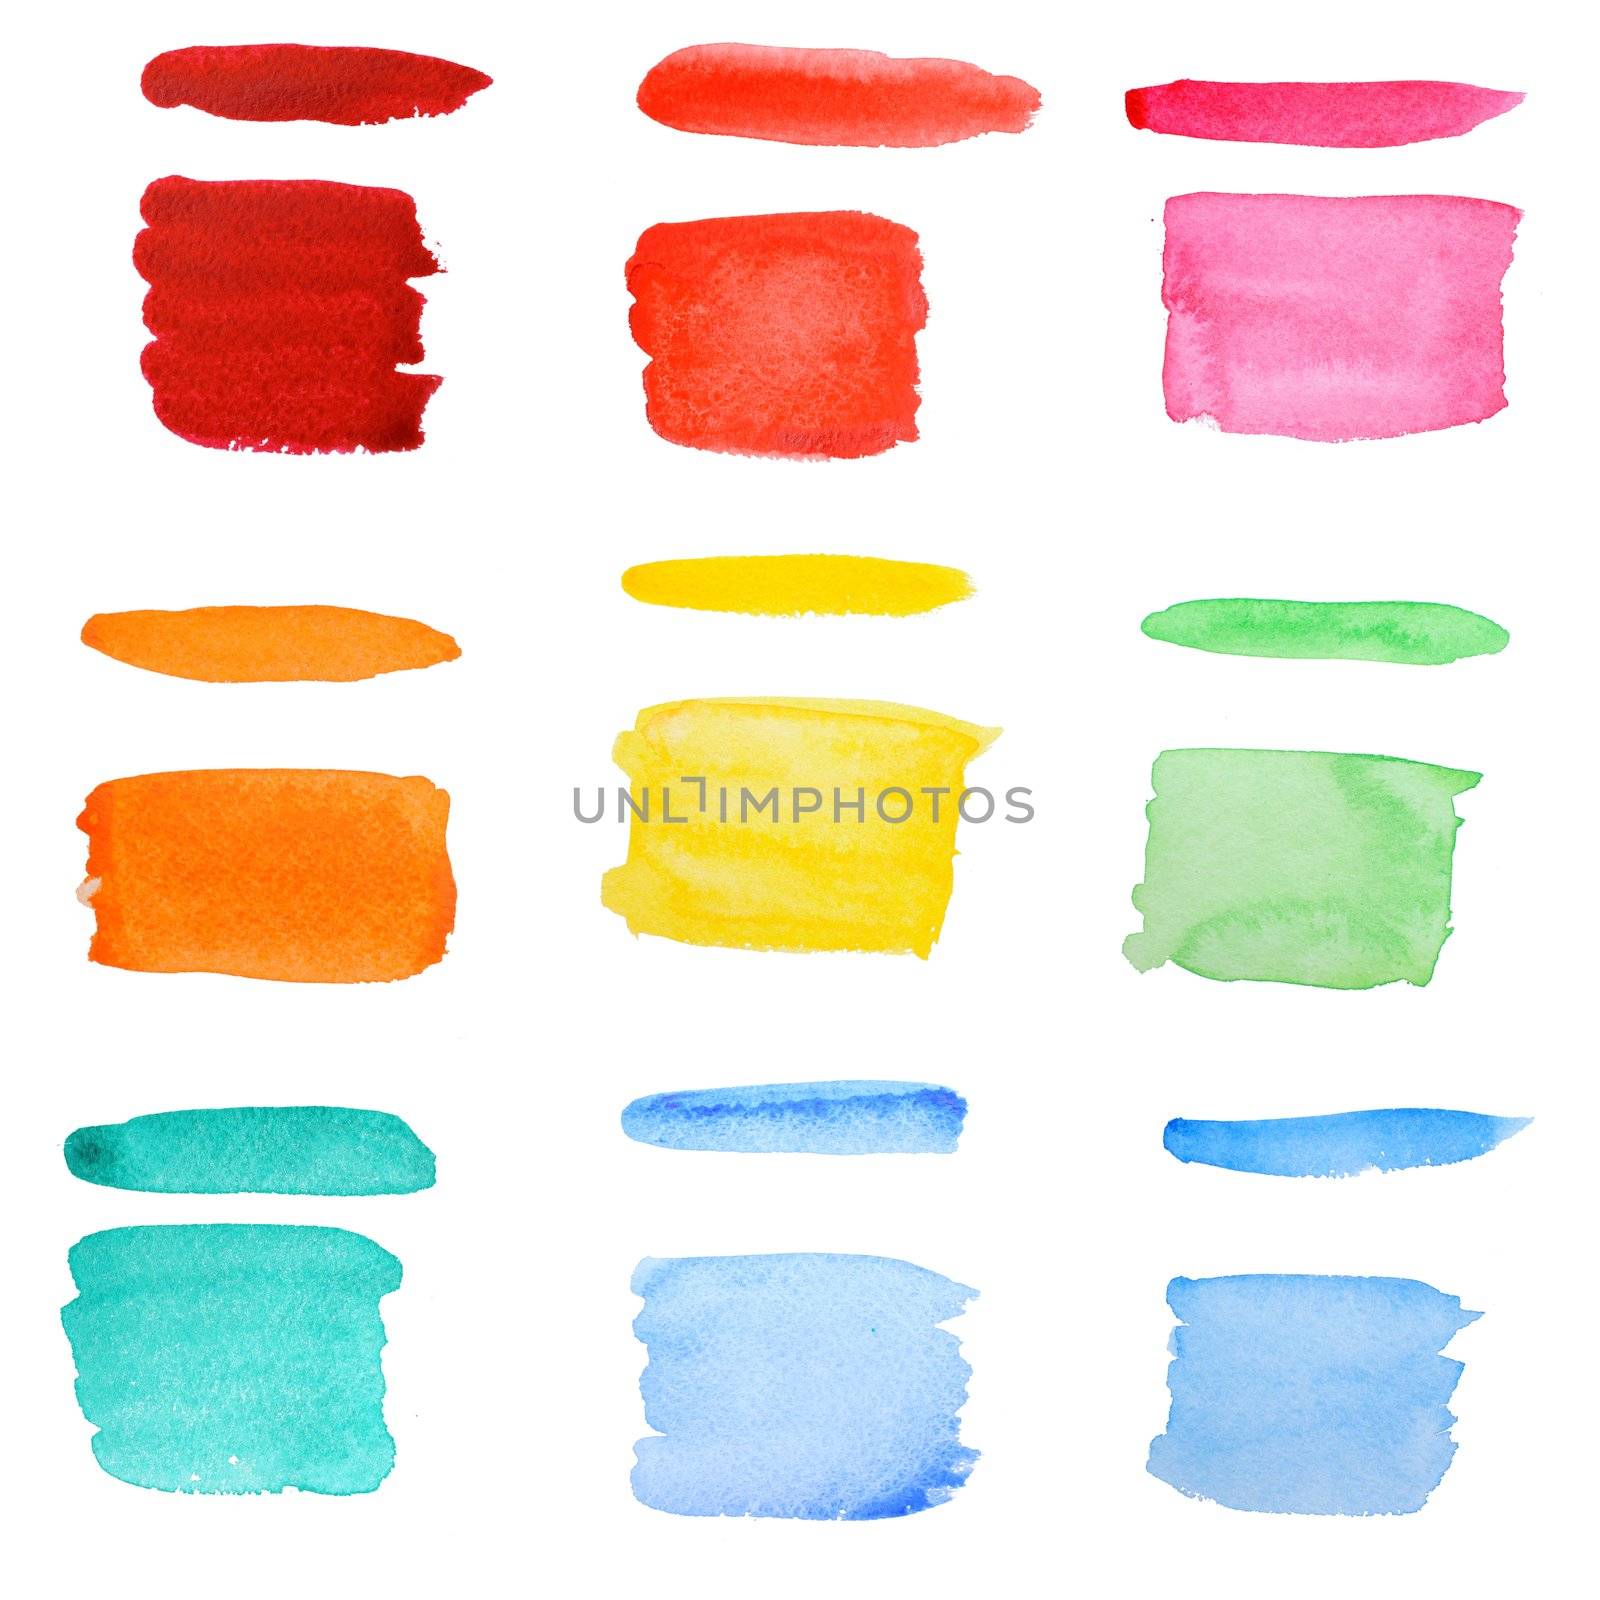 An image of a collection of bright colors